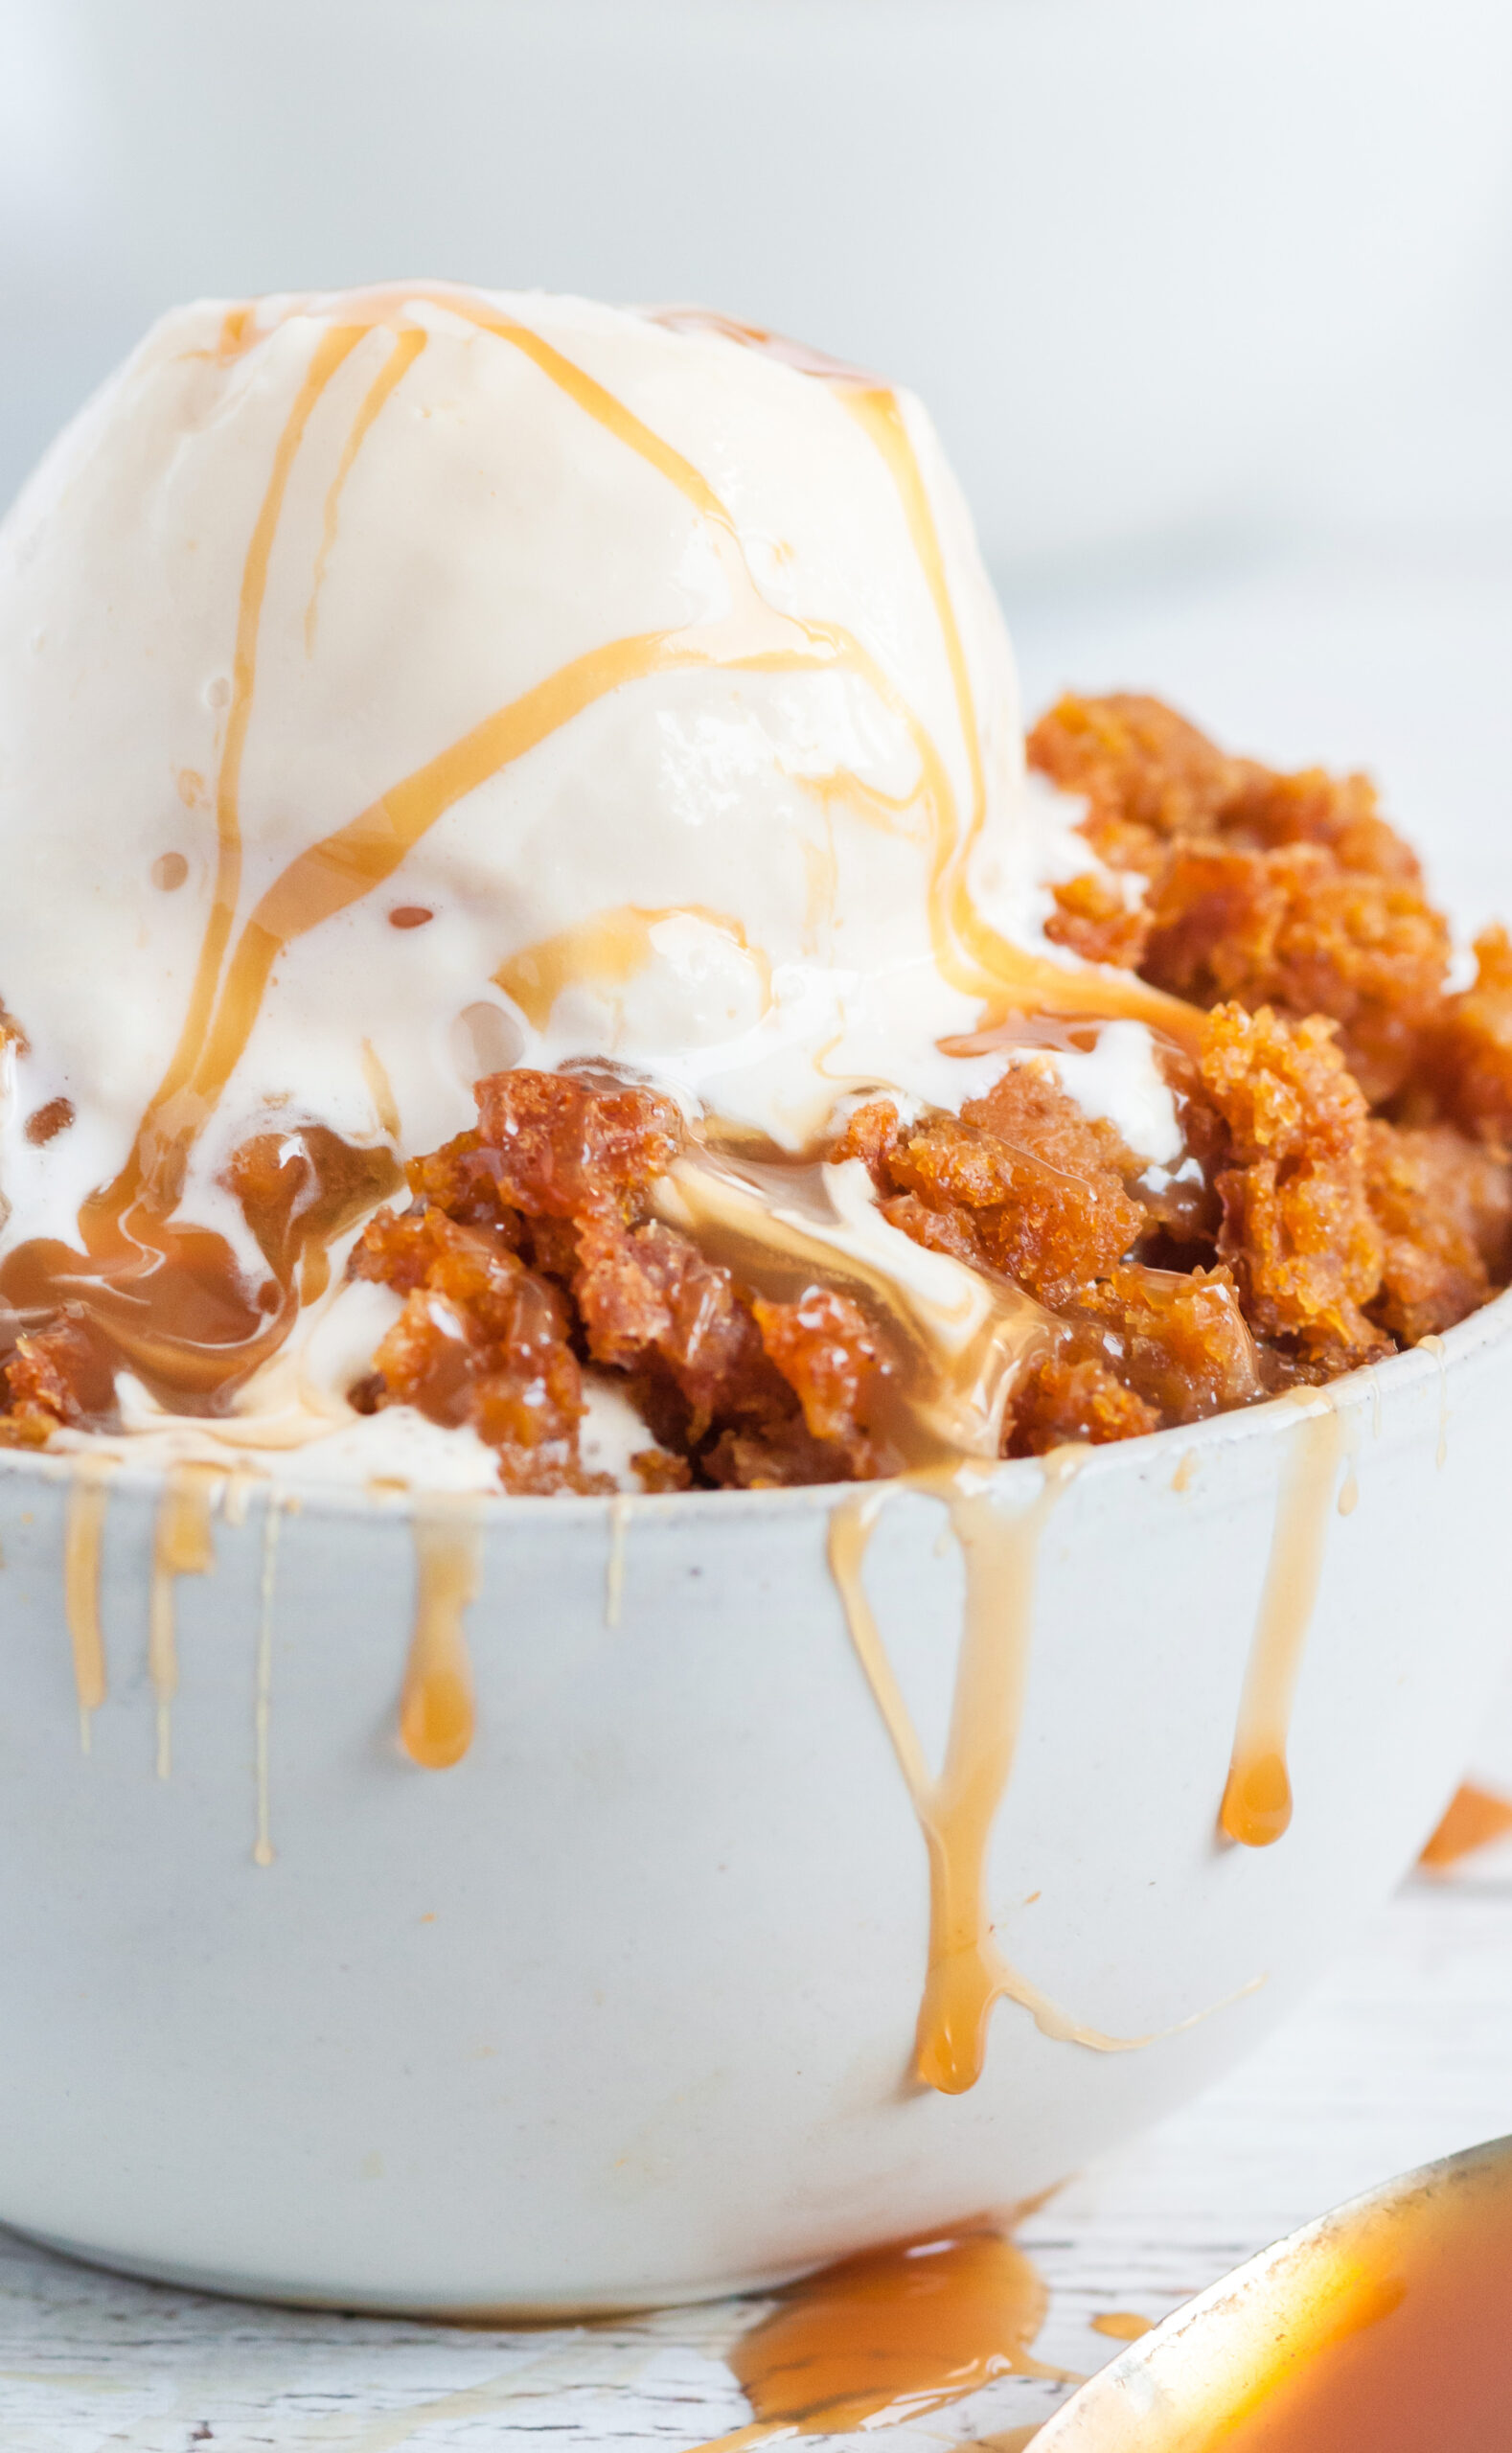 pumpkin dessert cake from slow cooker served in a bowl with ice cream and caramel